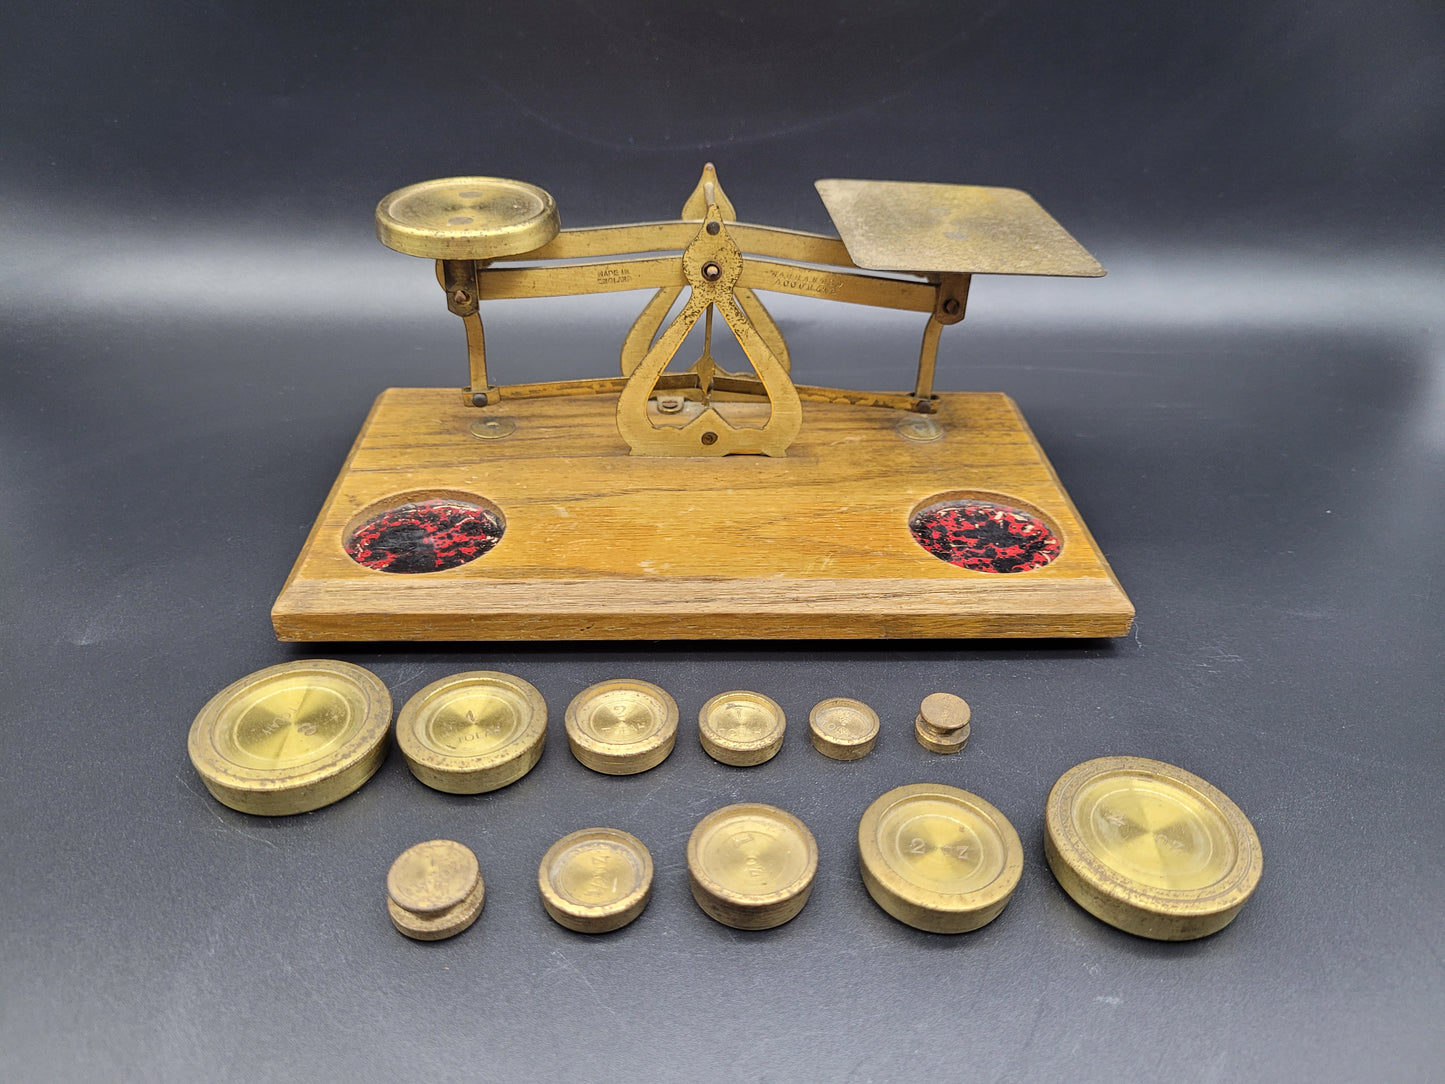 Antique Brass Postal Scales & Weights “Warranted Accurate “ Desk Scales